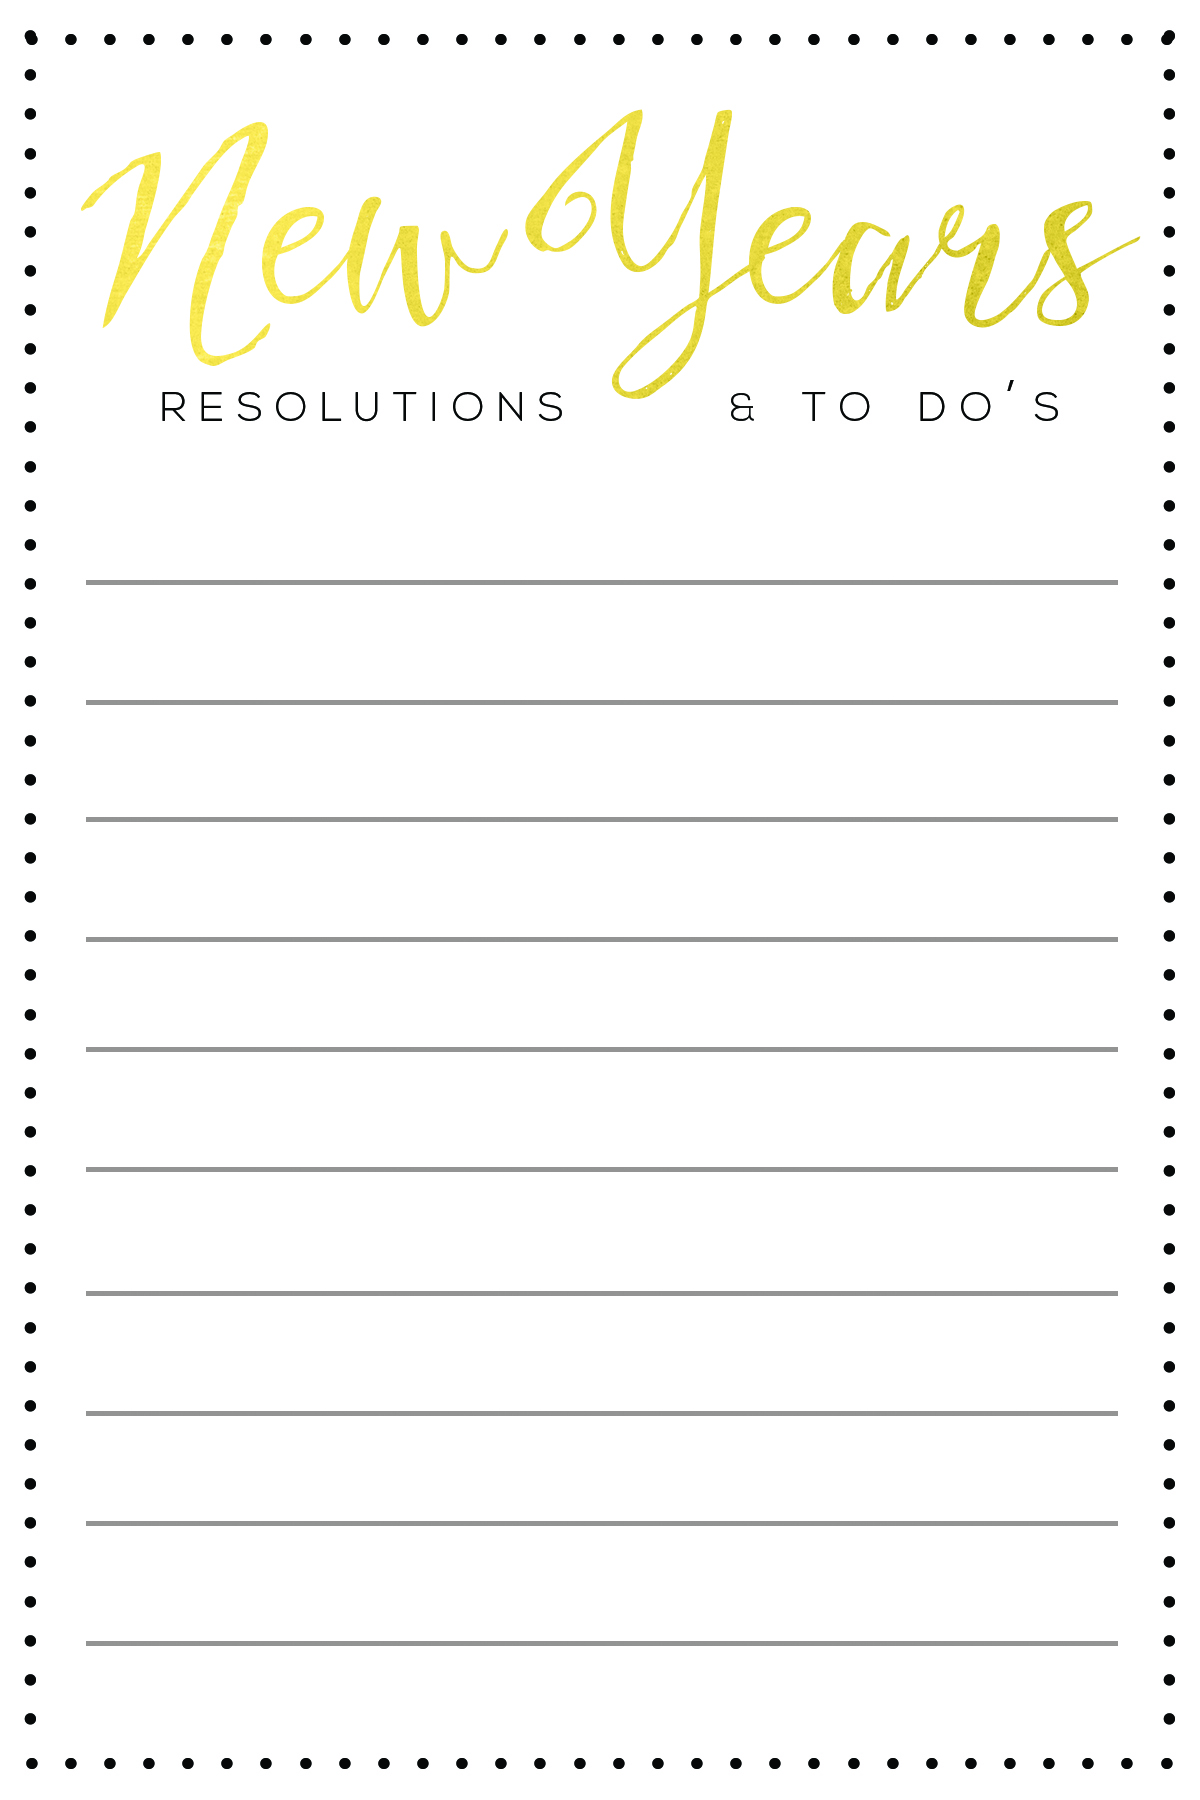 Printable New Year Resolution Template